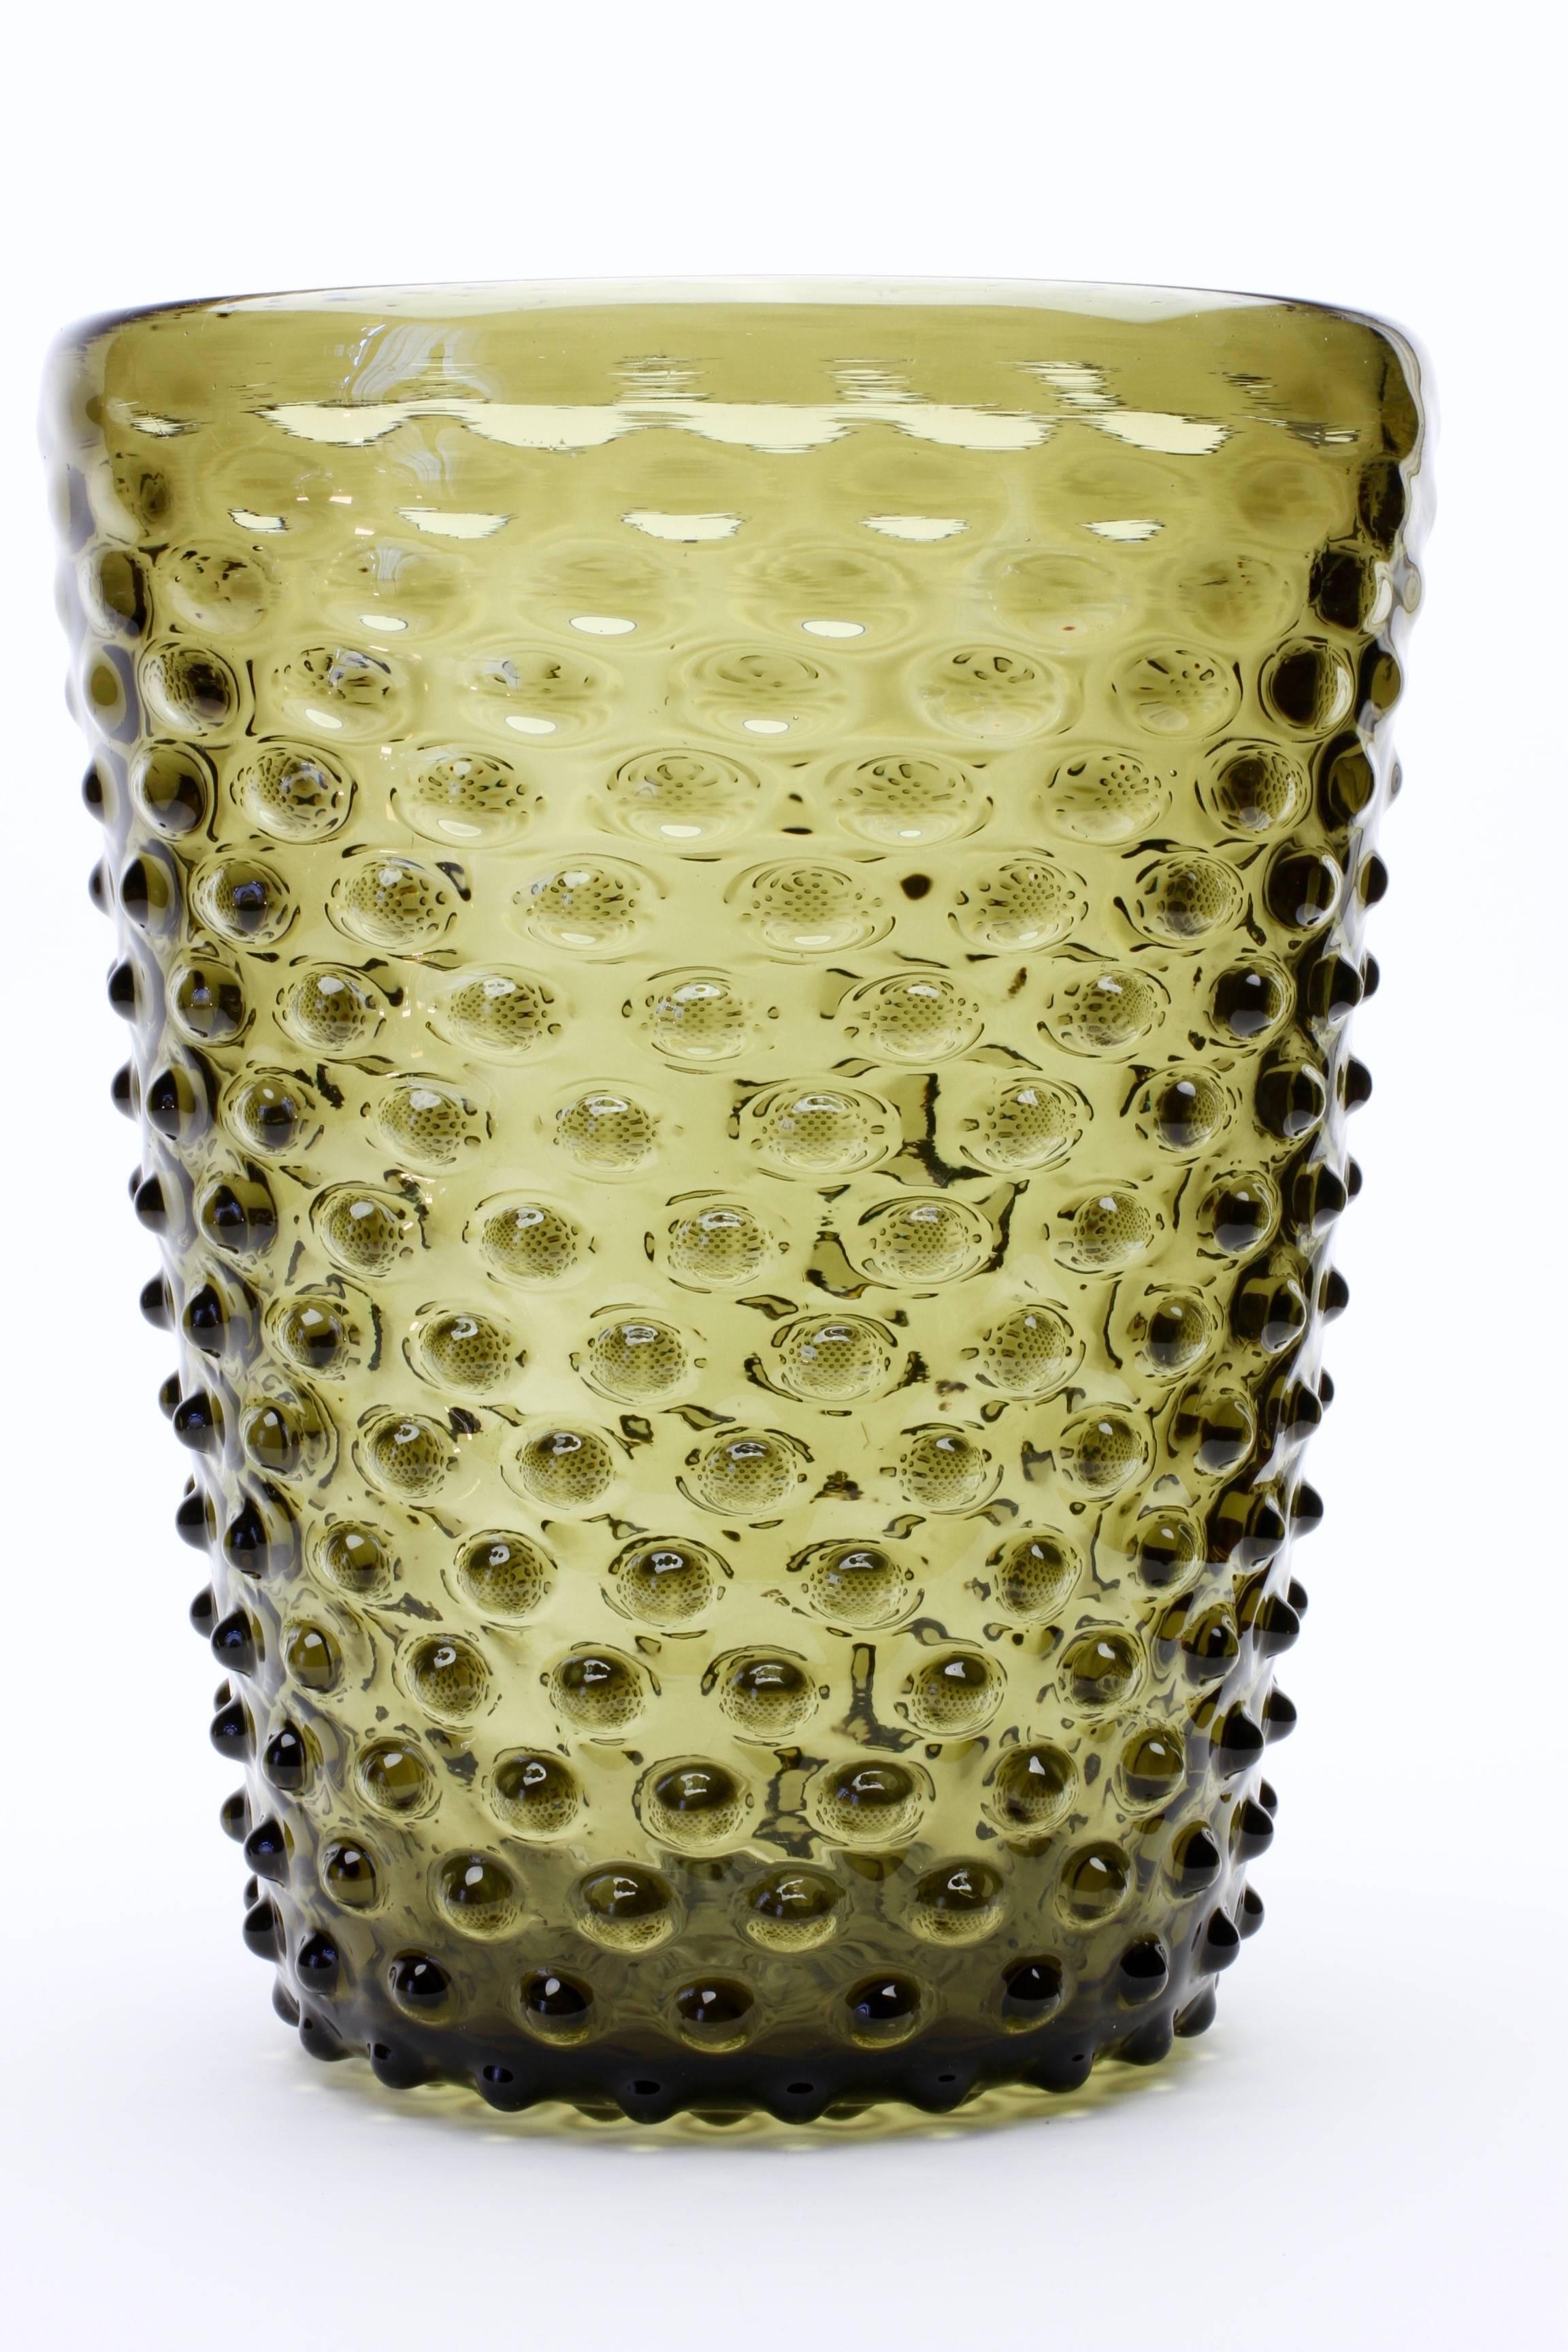 A beautiful and large midcentury 'Lenti' vase attributed to Empoli Glass, Italy, circa 1950. Empoli glass were based in Tuscany and produced wonderful glass of similar high quality to that of the Murano glass manufacturers. These 'Lenti' (meaning